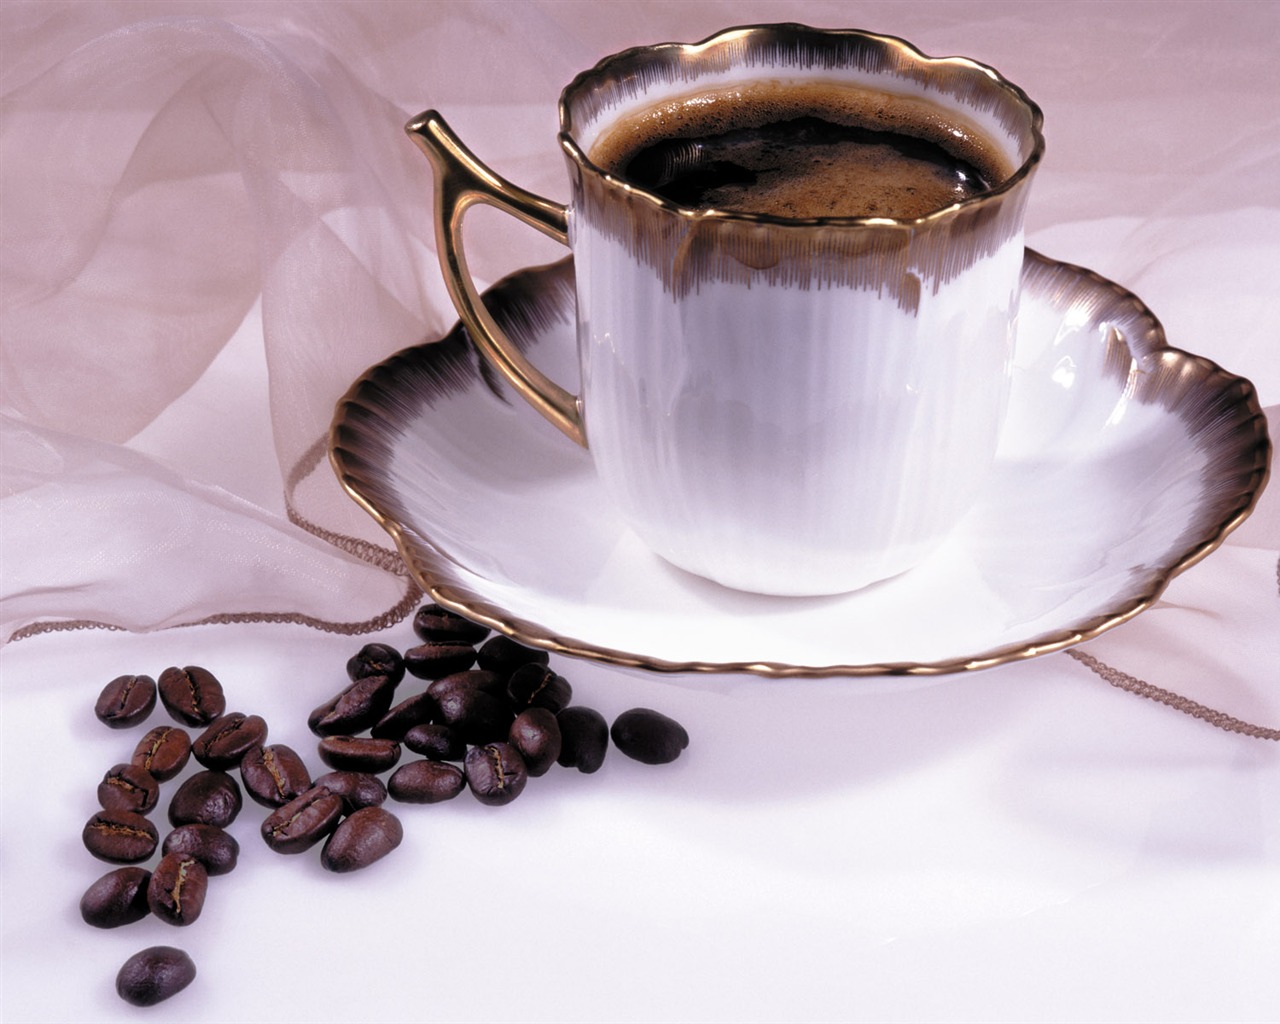 Coffee feature wallpaper (6) #17 - 1280x1024